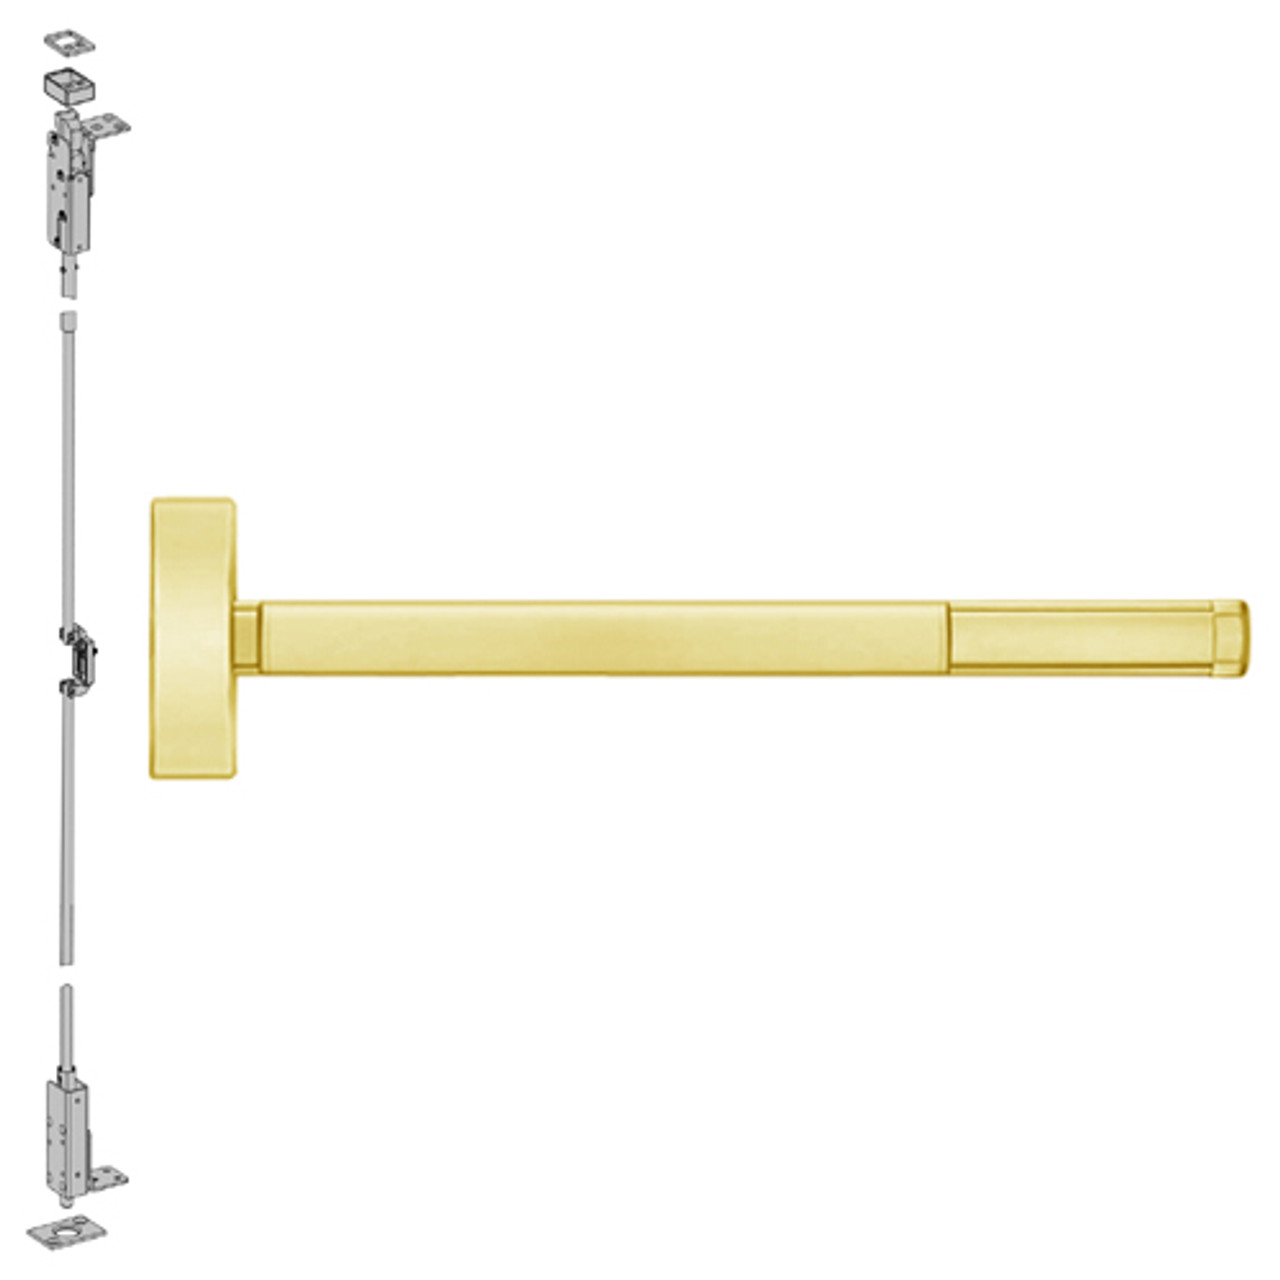 TSFL2702-605-48 PHI 2700 Series Wood Door Concealed Vertical Exit Device with Touchbar Monitoring Switch Prepped for Dummy Trim in Bright Brass Finish